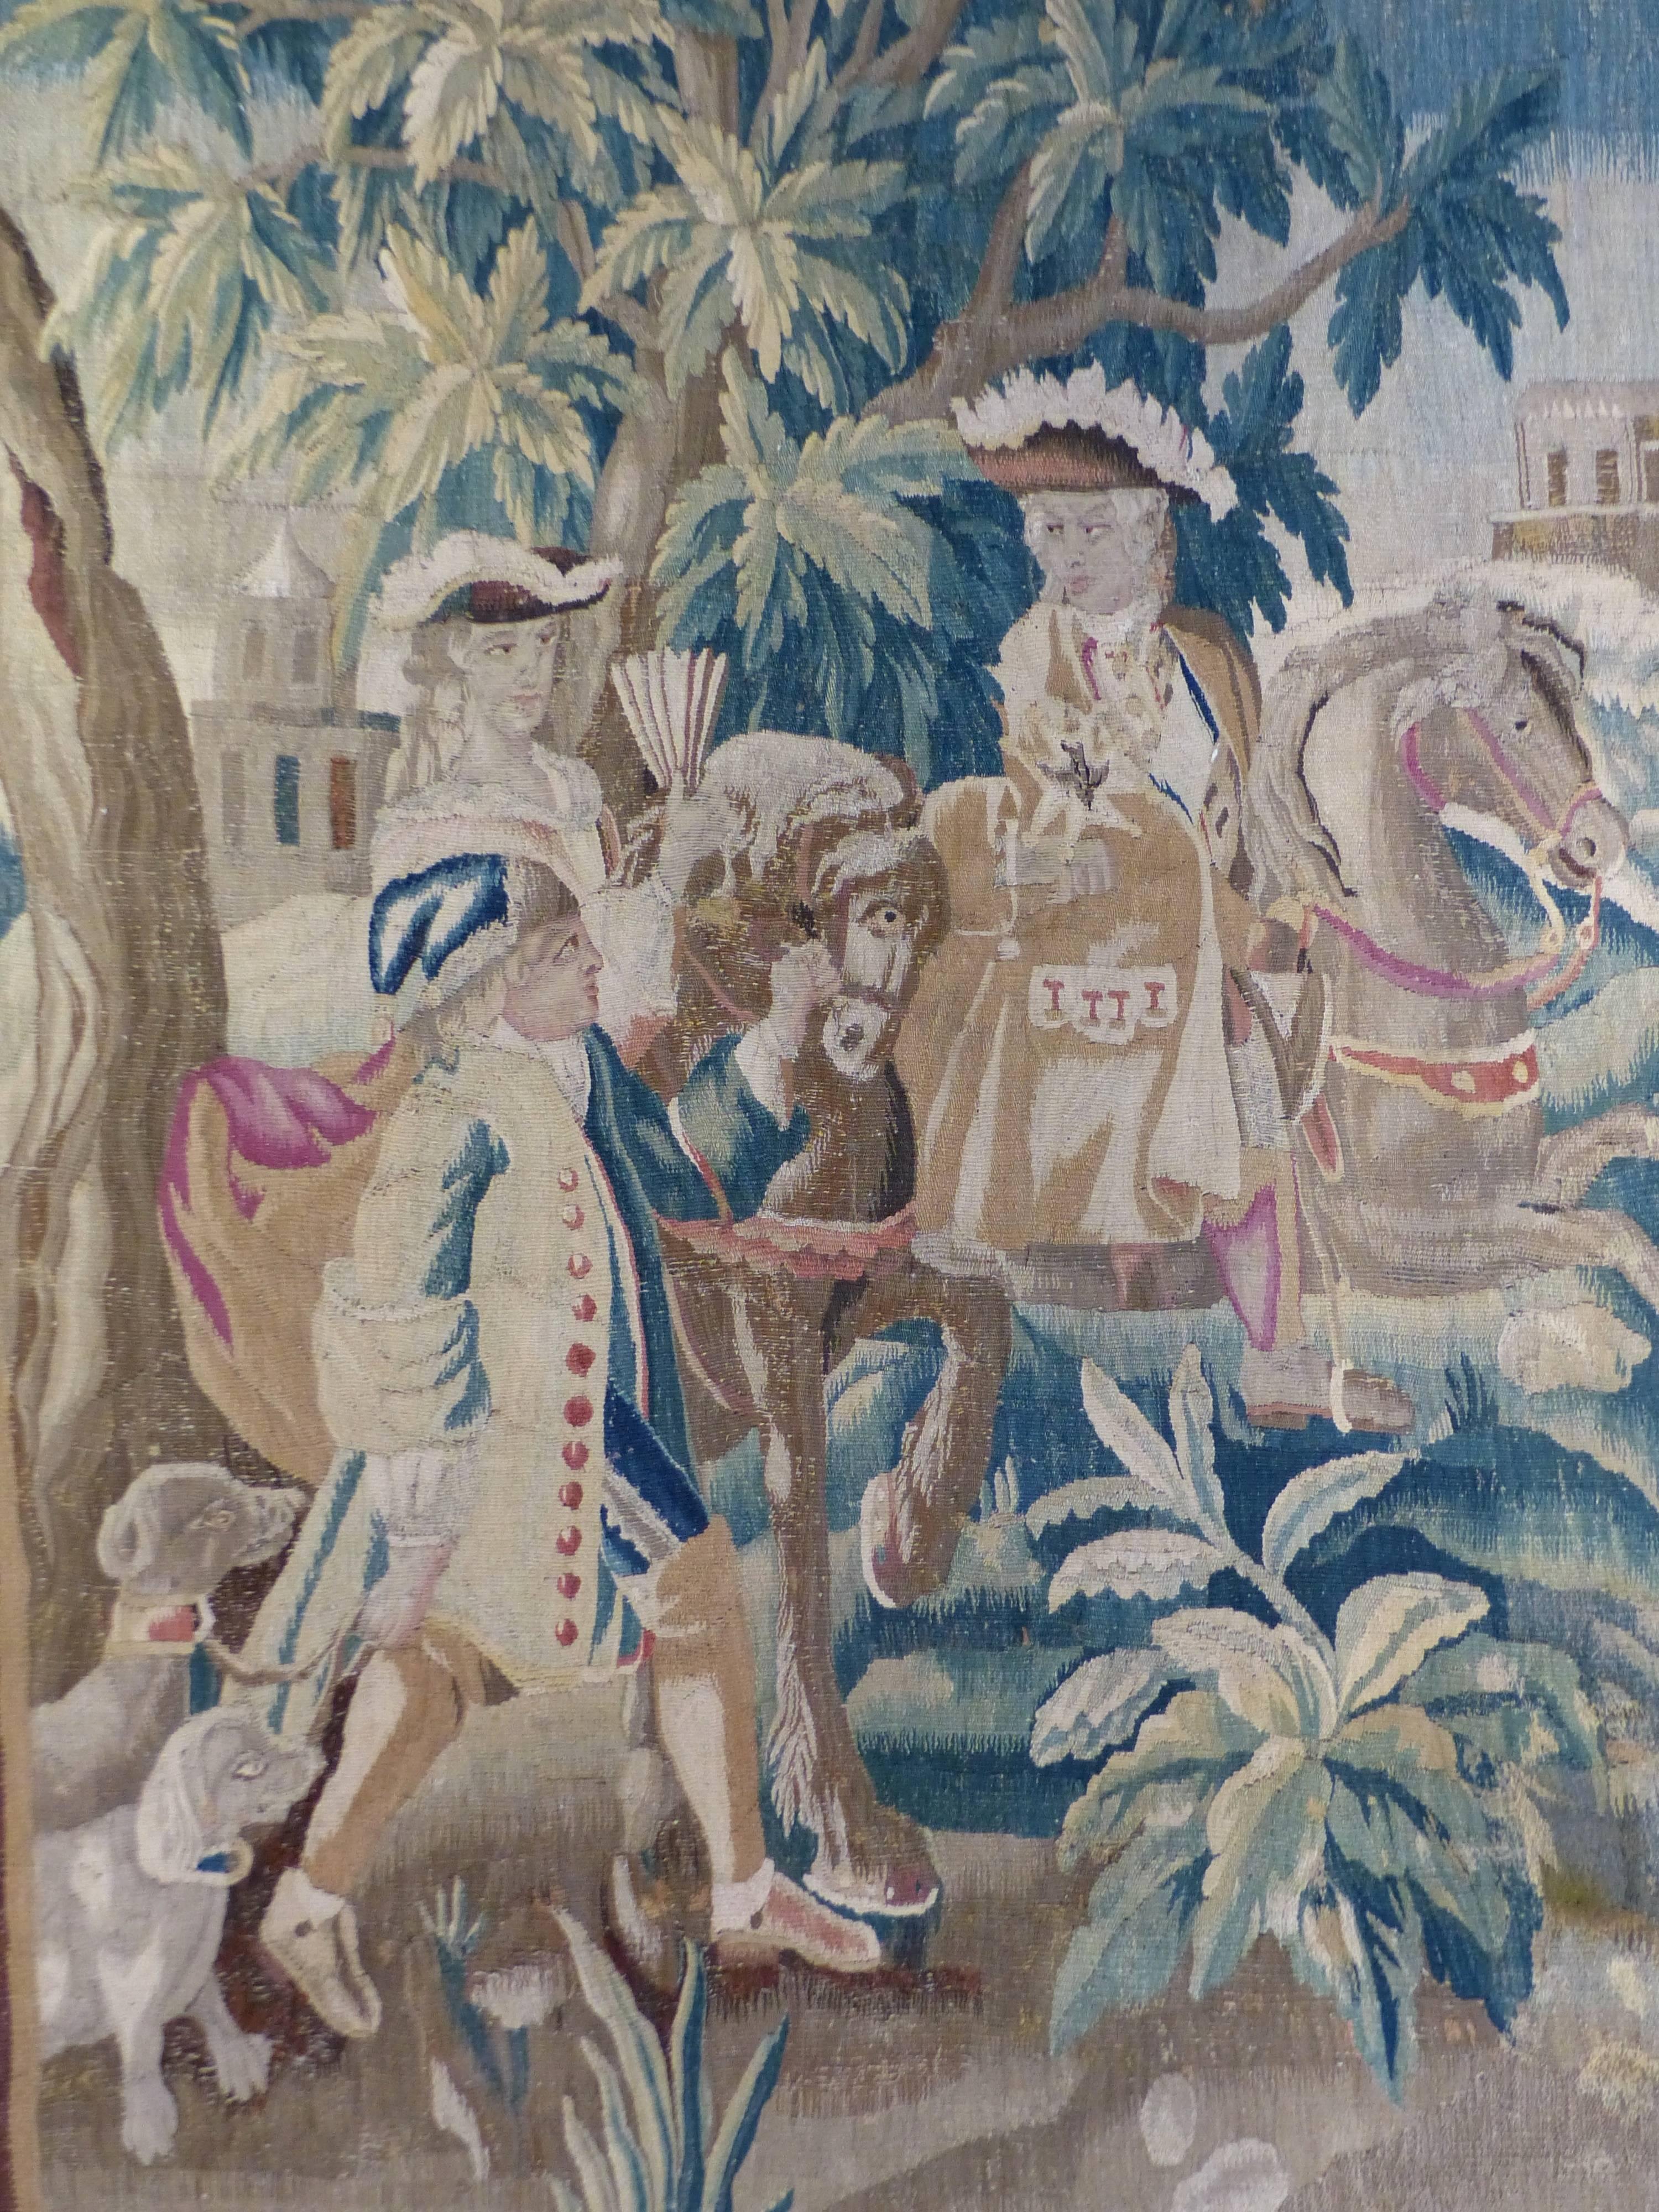 French Aubusson tapestry, handwoven silk and wool during the 18th century.
This tapestry depicts a hunting scene, 
It was executed on the occasion of the marriage of Jean-Frédéric Louis de Veynes du Prayet, Marquis of Veynes (left part of the